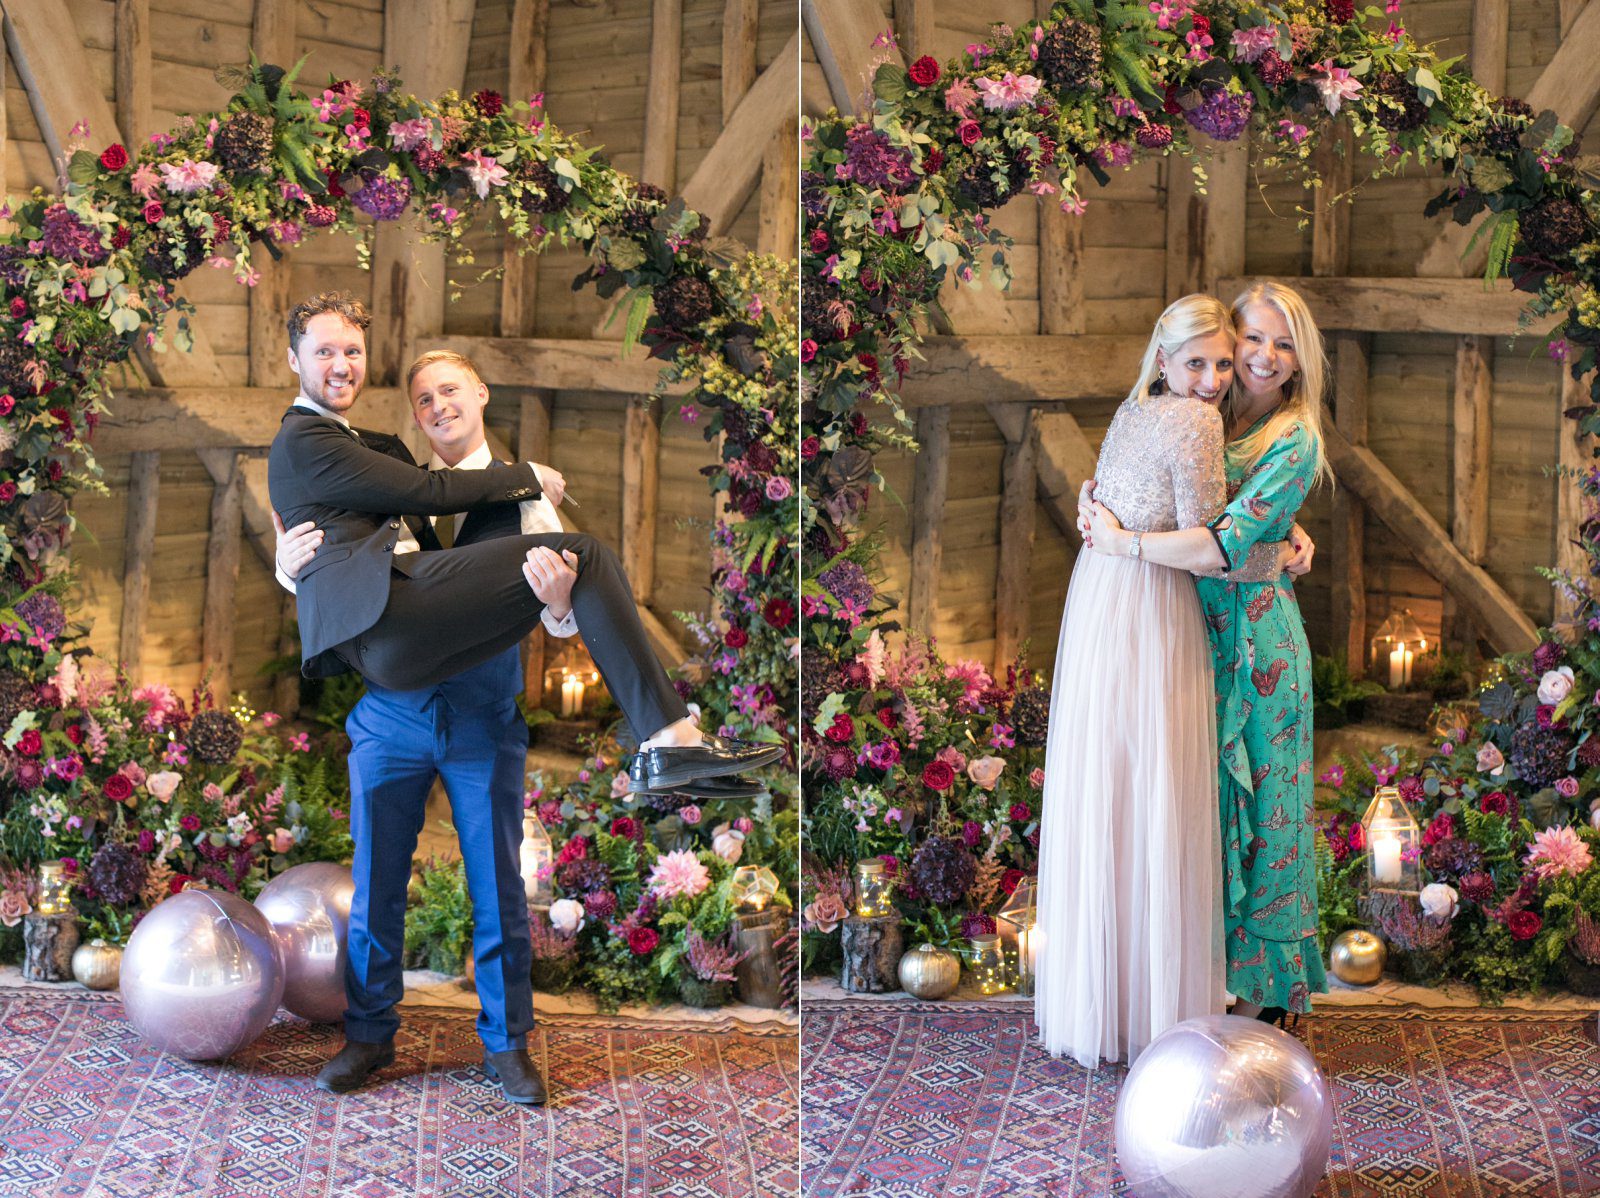 A floral moongate used as a wedding photobooth backdrop at High Billinghurst Farm